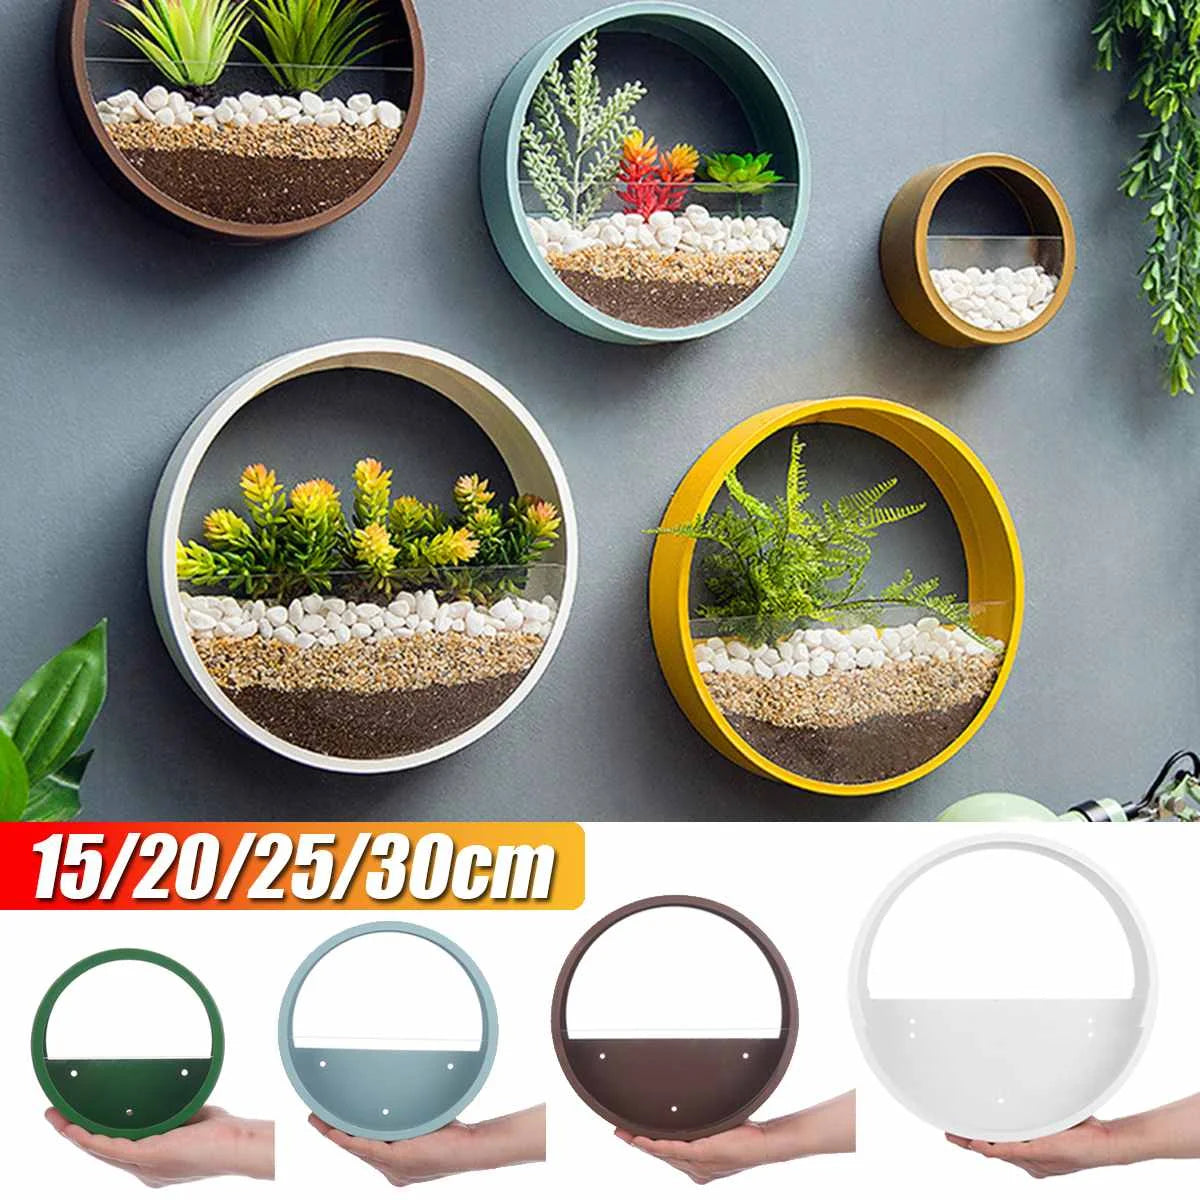 Round Iron Wall Vase Home Living Room Hanging Basket Decorative Flower Pot Wall Decor Succulent Plant Planters Art Glass Vases